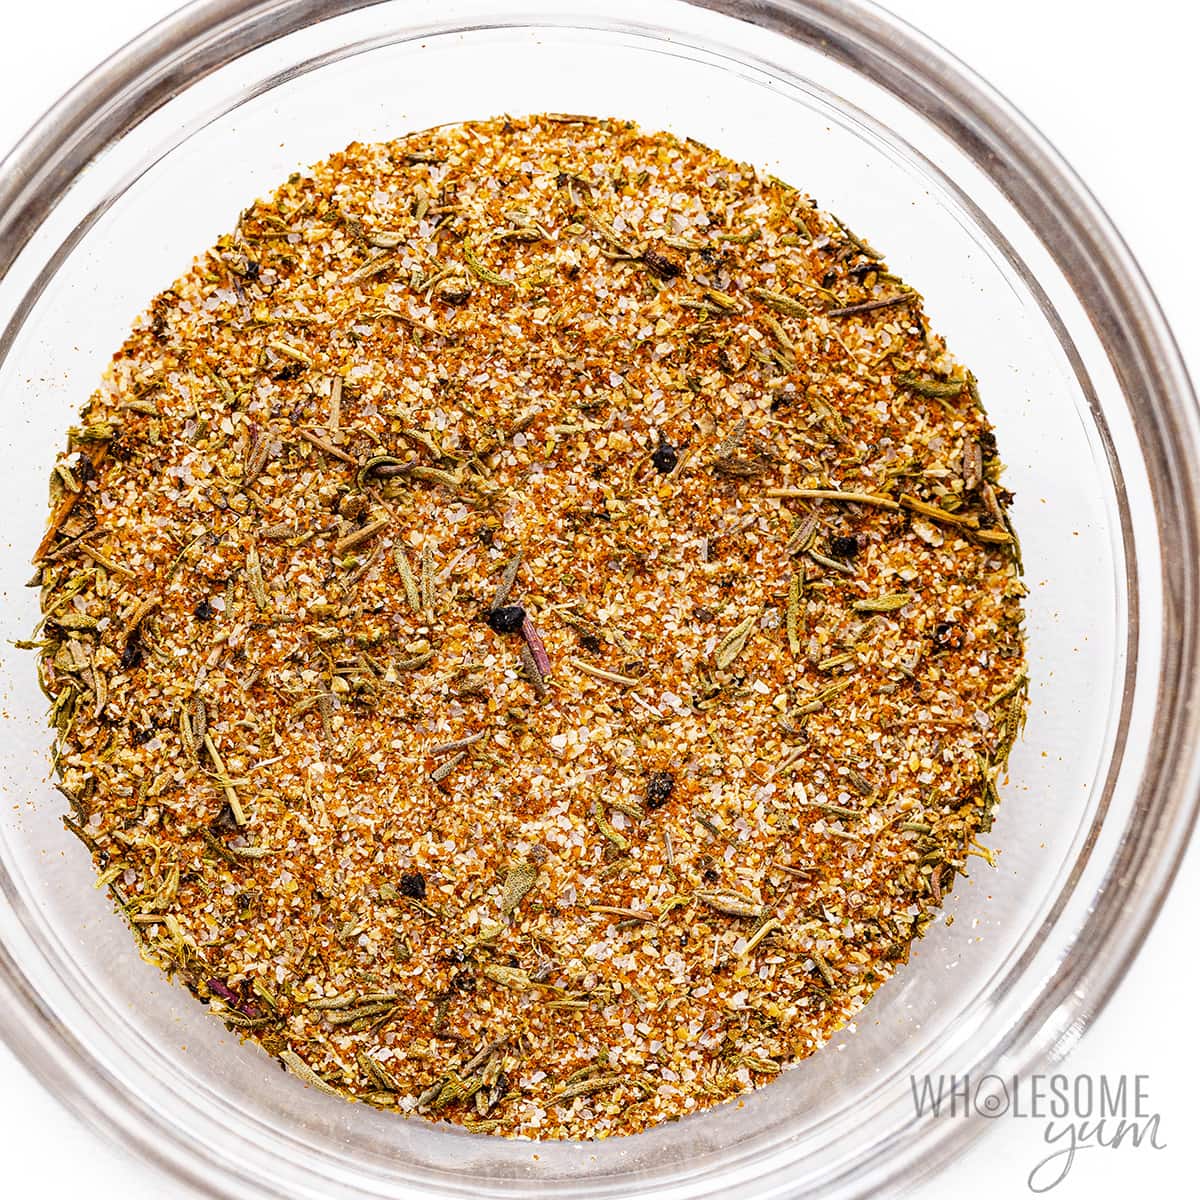 Spices are mixed together in a bowl.